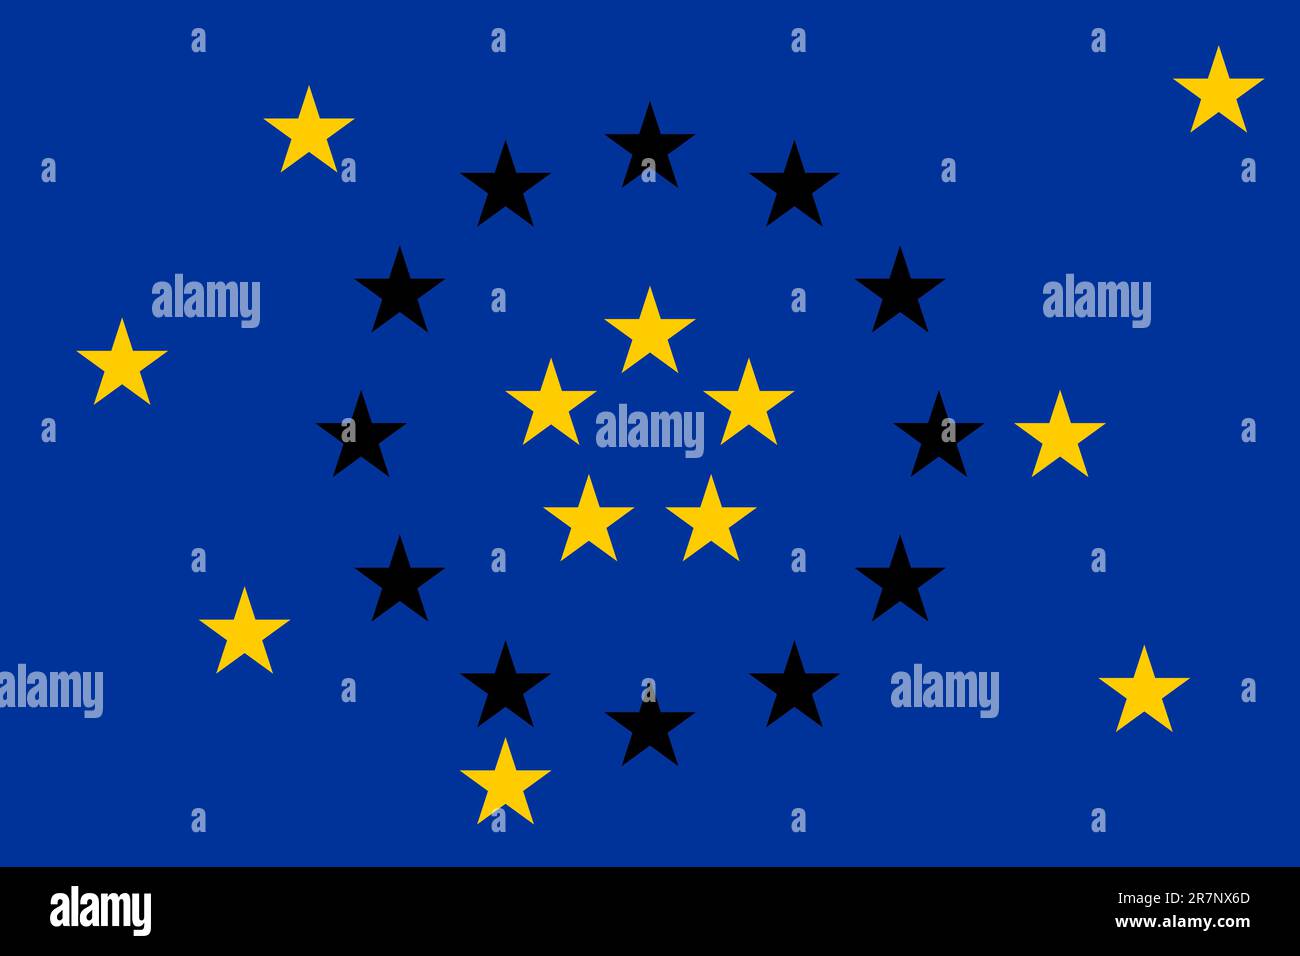 Illustration of the problems in the European Union. Also available as a Vector in Adobe illustrator EPS 10 format. The different graphics are all o... Stock Vector